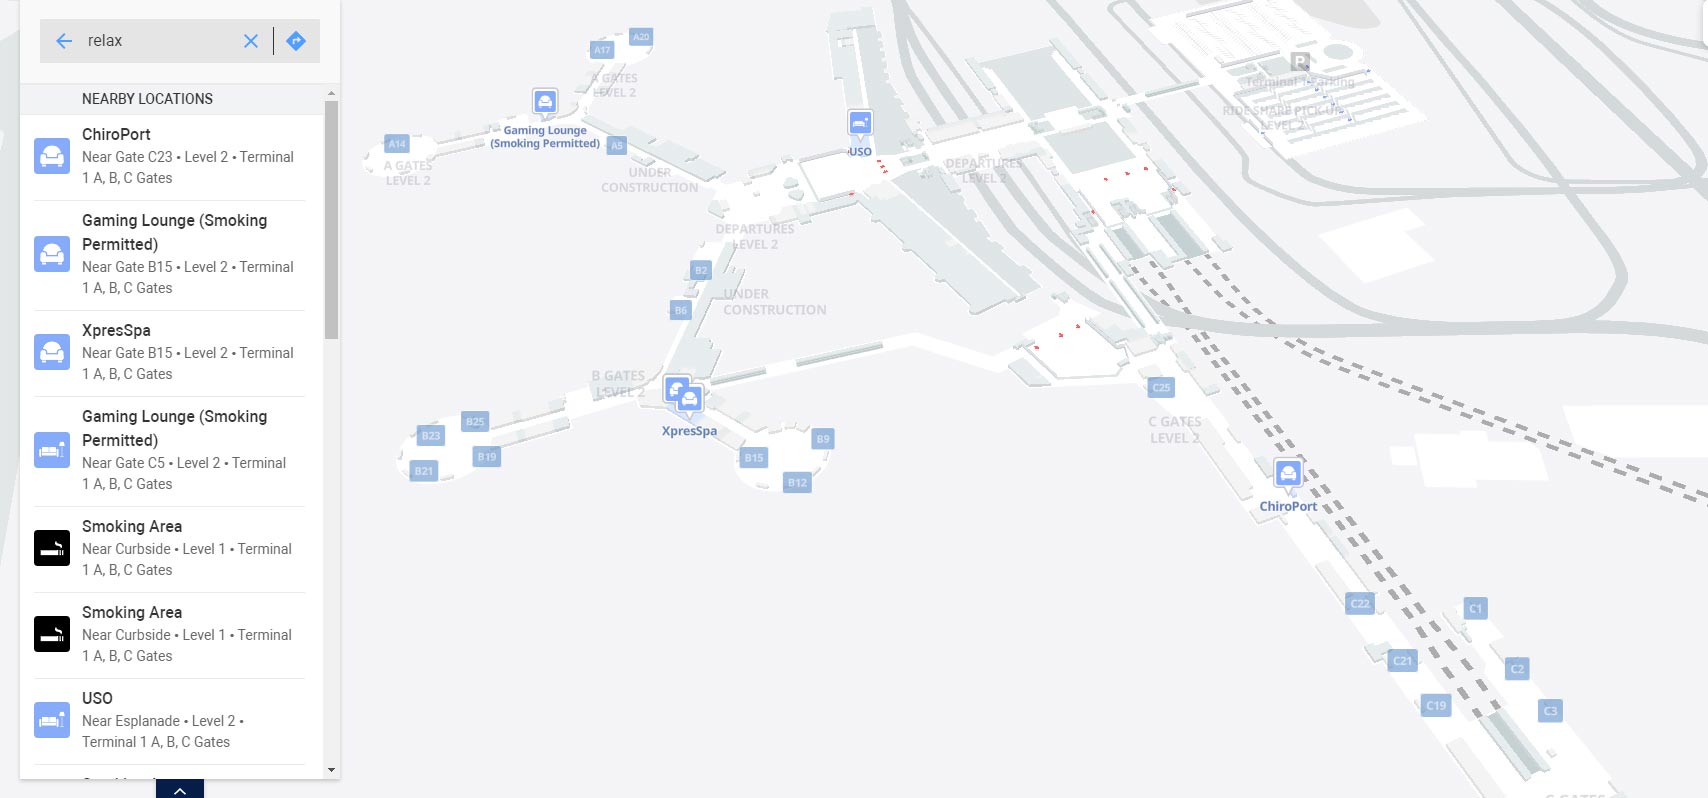 Services and lounges on Las Vegas airport terminal 1 map